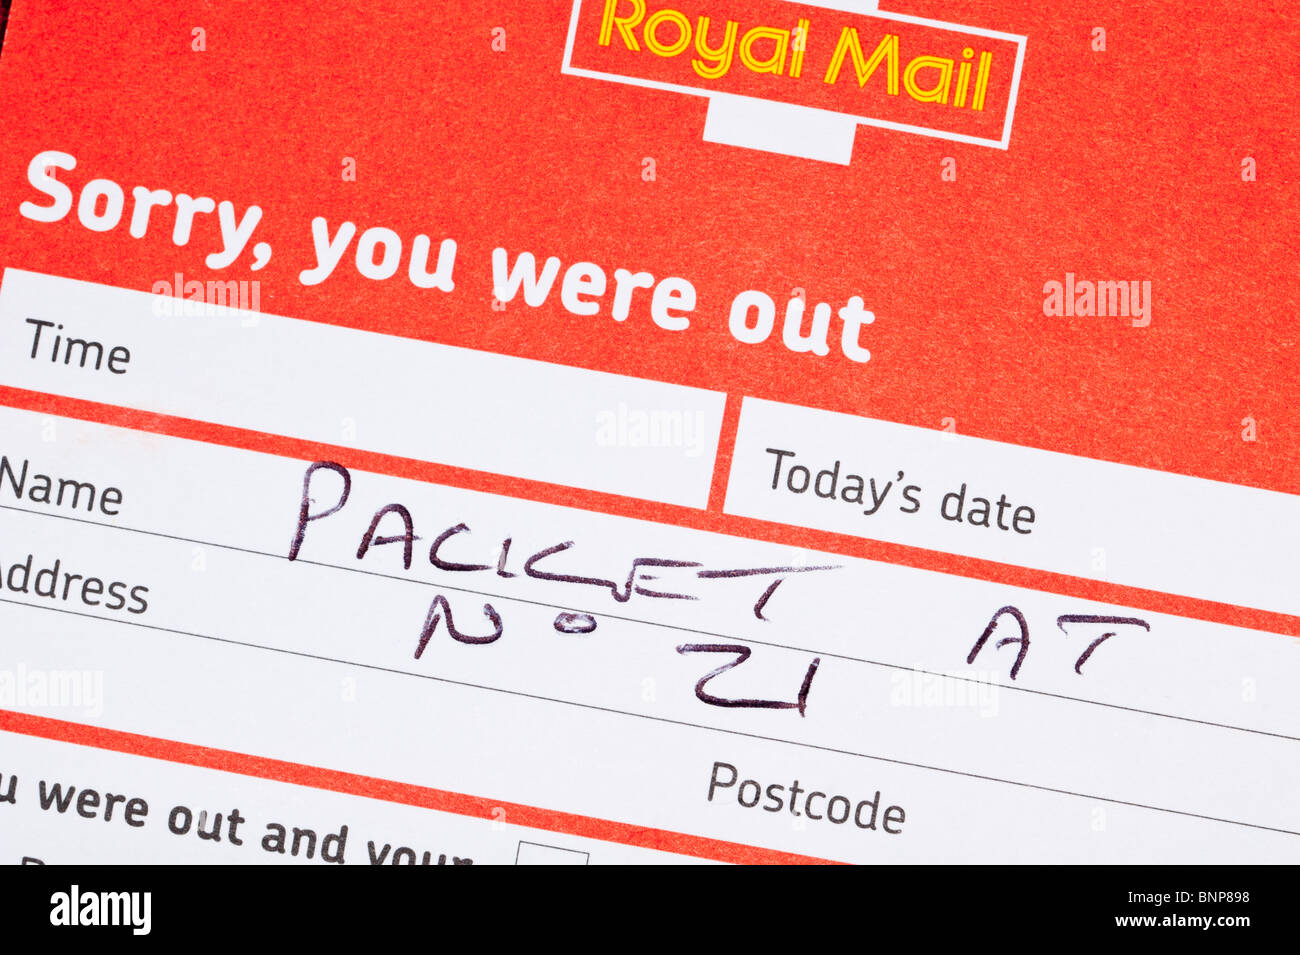 A Royal Mail form left when occupier was out stating that a parcel is left with neighbour in the Uk Stock Photo